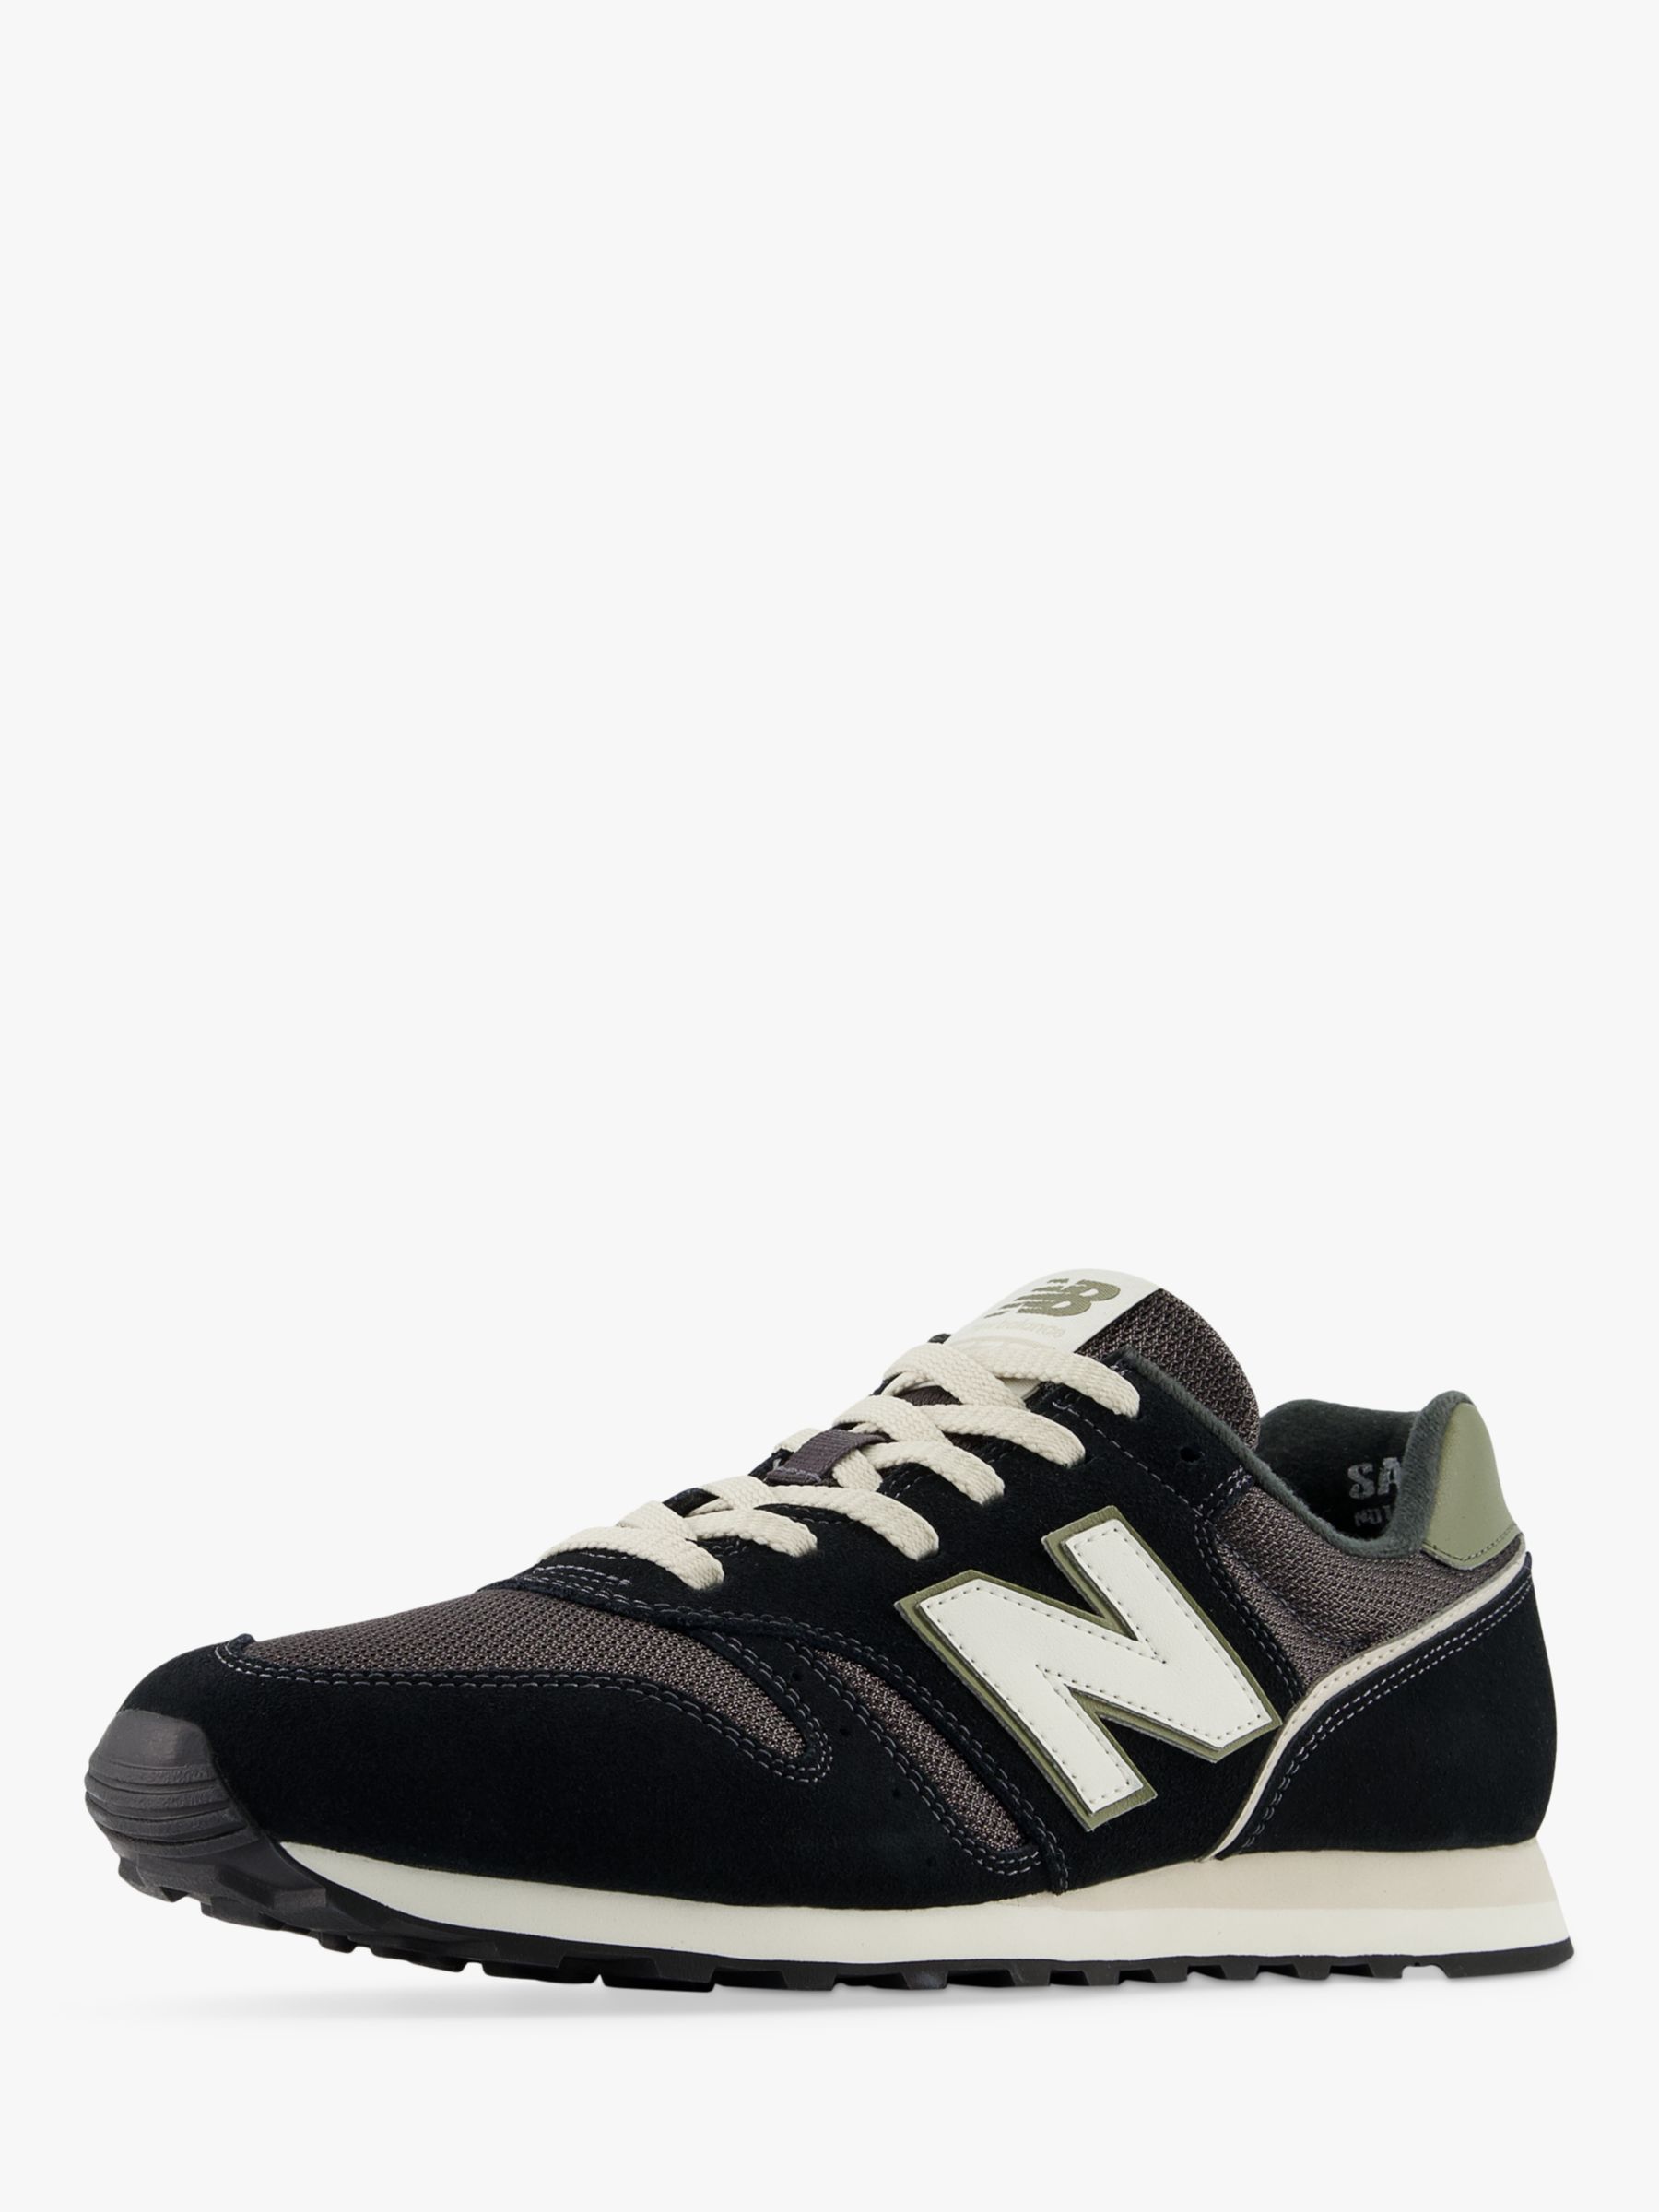 Buy New Balance 373 V2 Trainers, Black/Silver Online at johnlewis.com